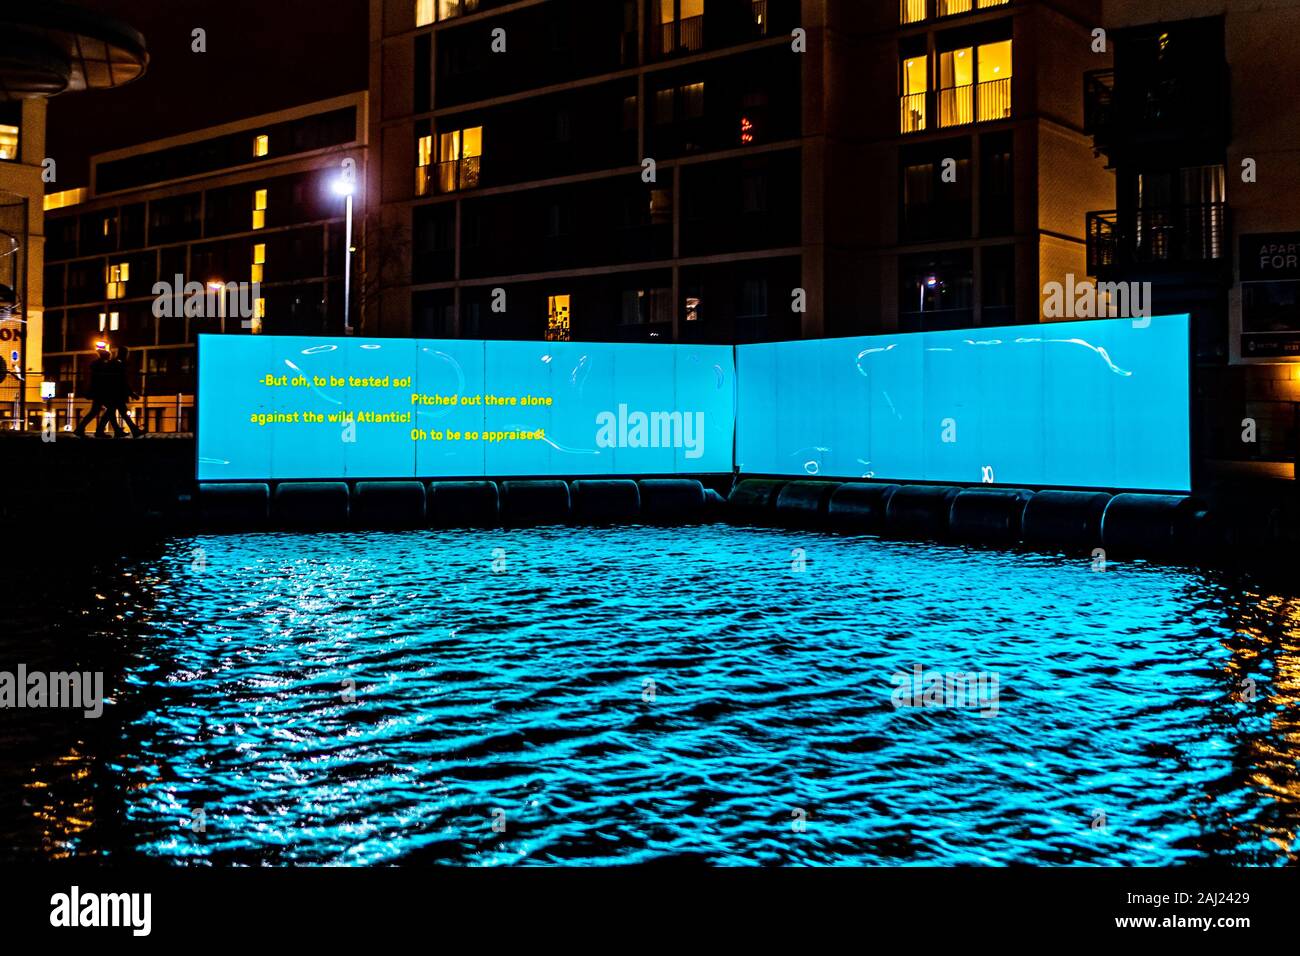 Edinburgh, UK. Wed 1st January 2020. The opening night of “Message from the Skies: Shorelines”, a collection of letters to Scotland reflecting on our relationship with our seas, waters and coasts and our maritime heritage. This projection is “Seascape with WEC” which takes place by the Union Canal in Fountainbridge and features writer Kathleen Jamie, designer Thomas Moulson and projection by Bright Side Studios. Kathleen Jamie’s poem “Seascape with WEC” captures her curiosity with new wave energy converters she witnessed being tested on the Orkney Islands. Stock Photo